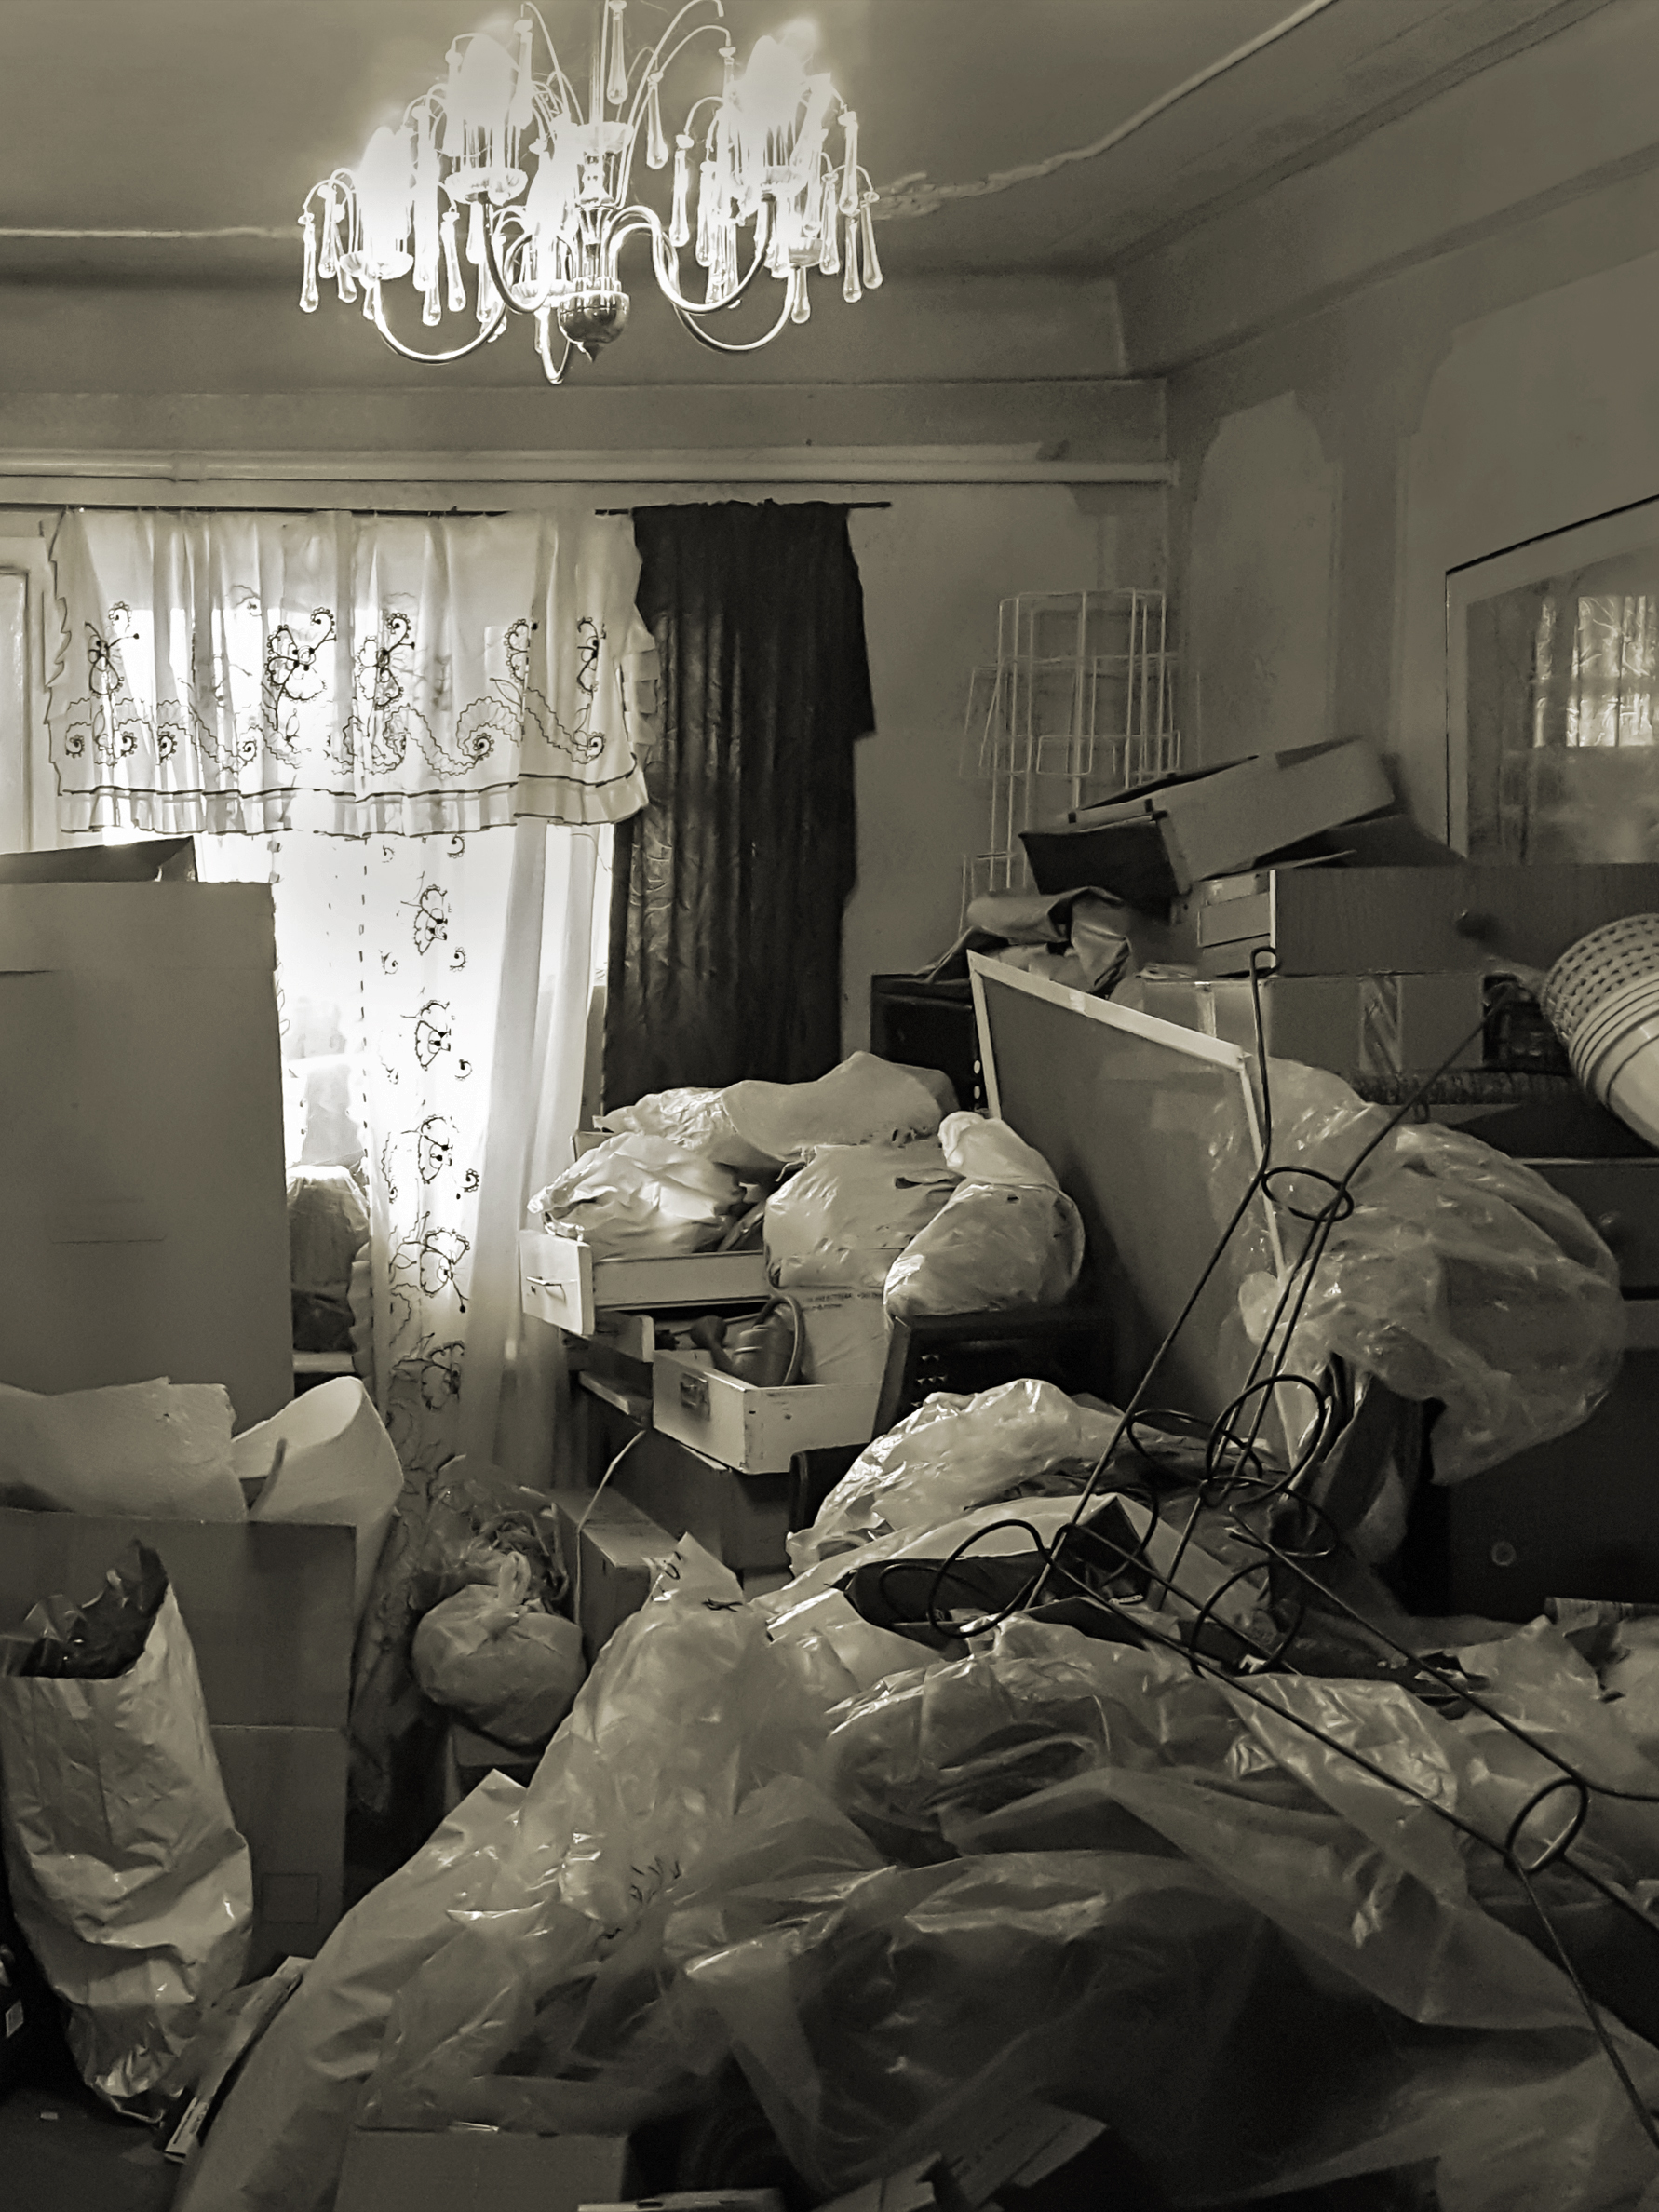 Image of hoarding in a living room